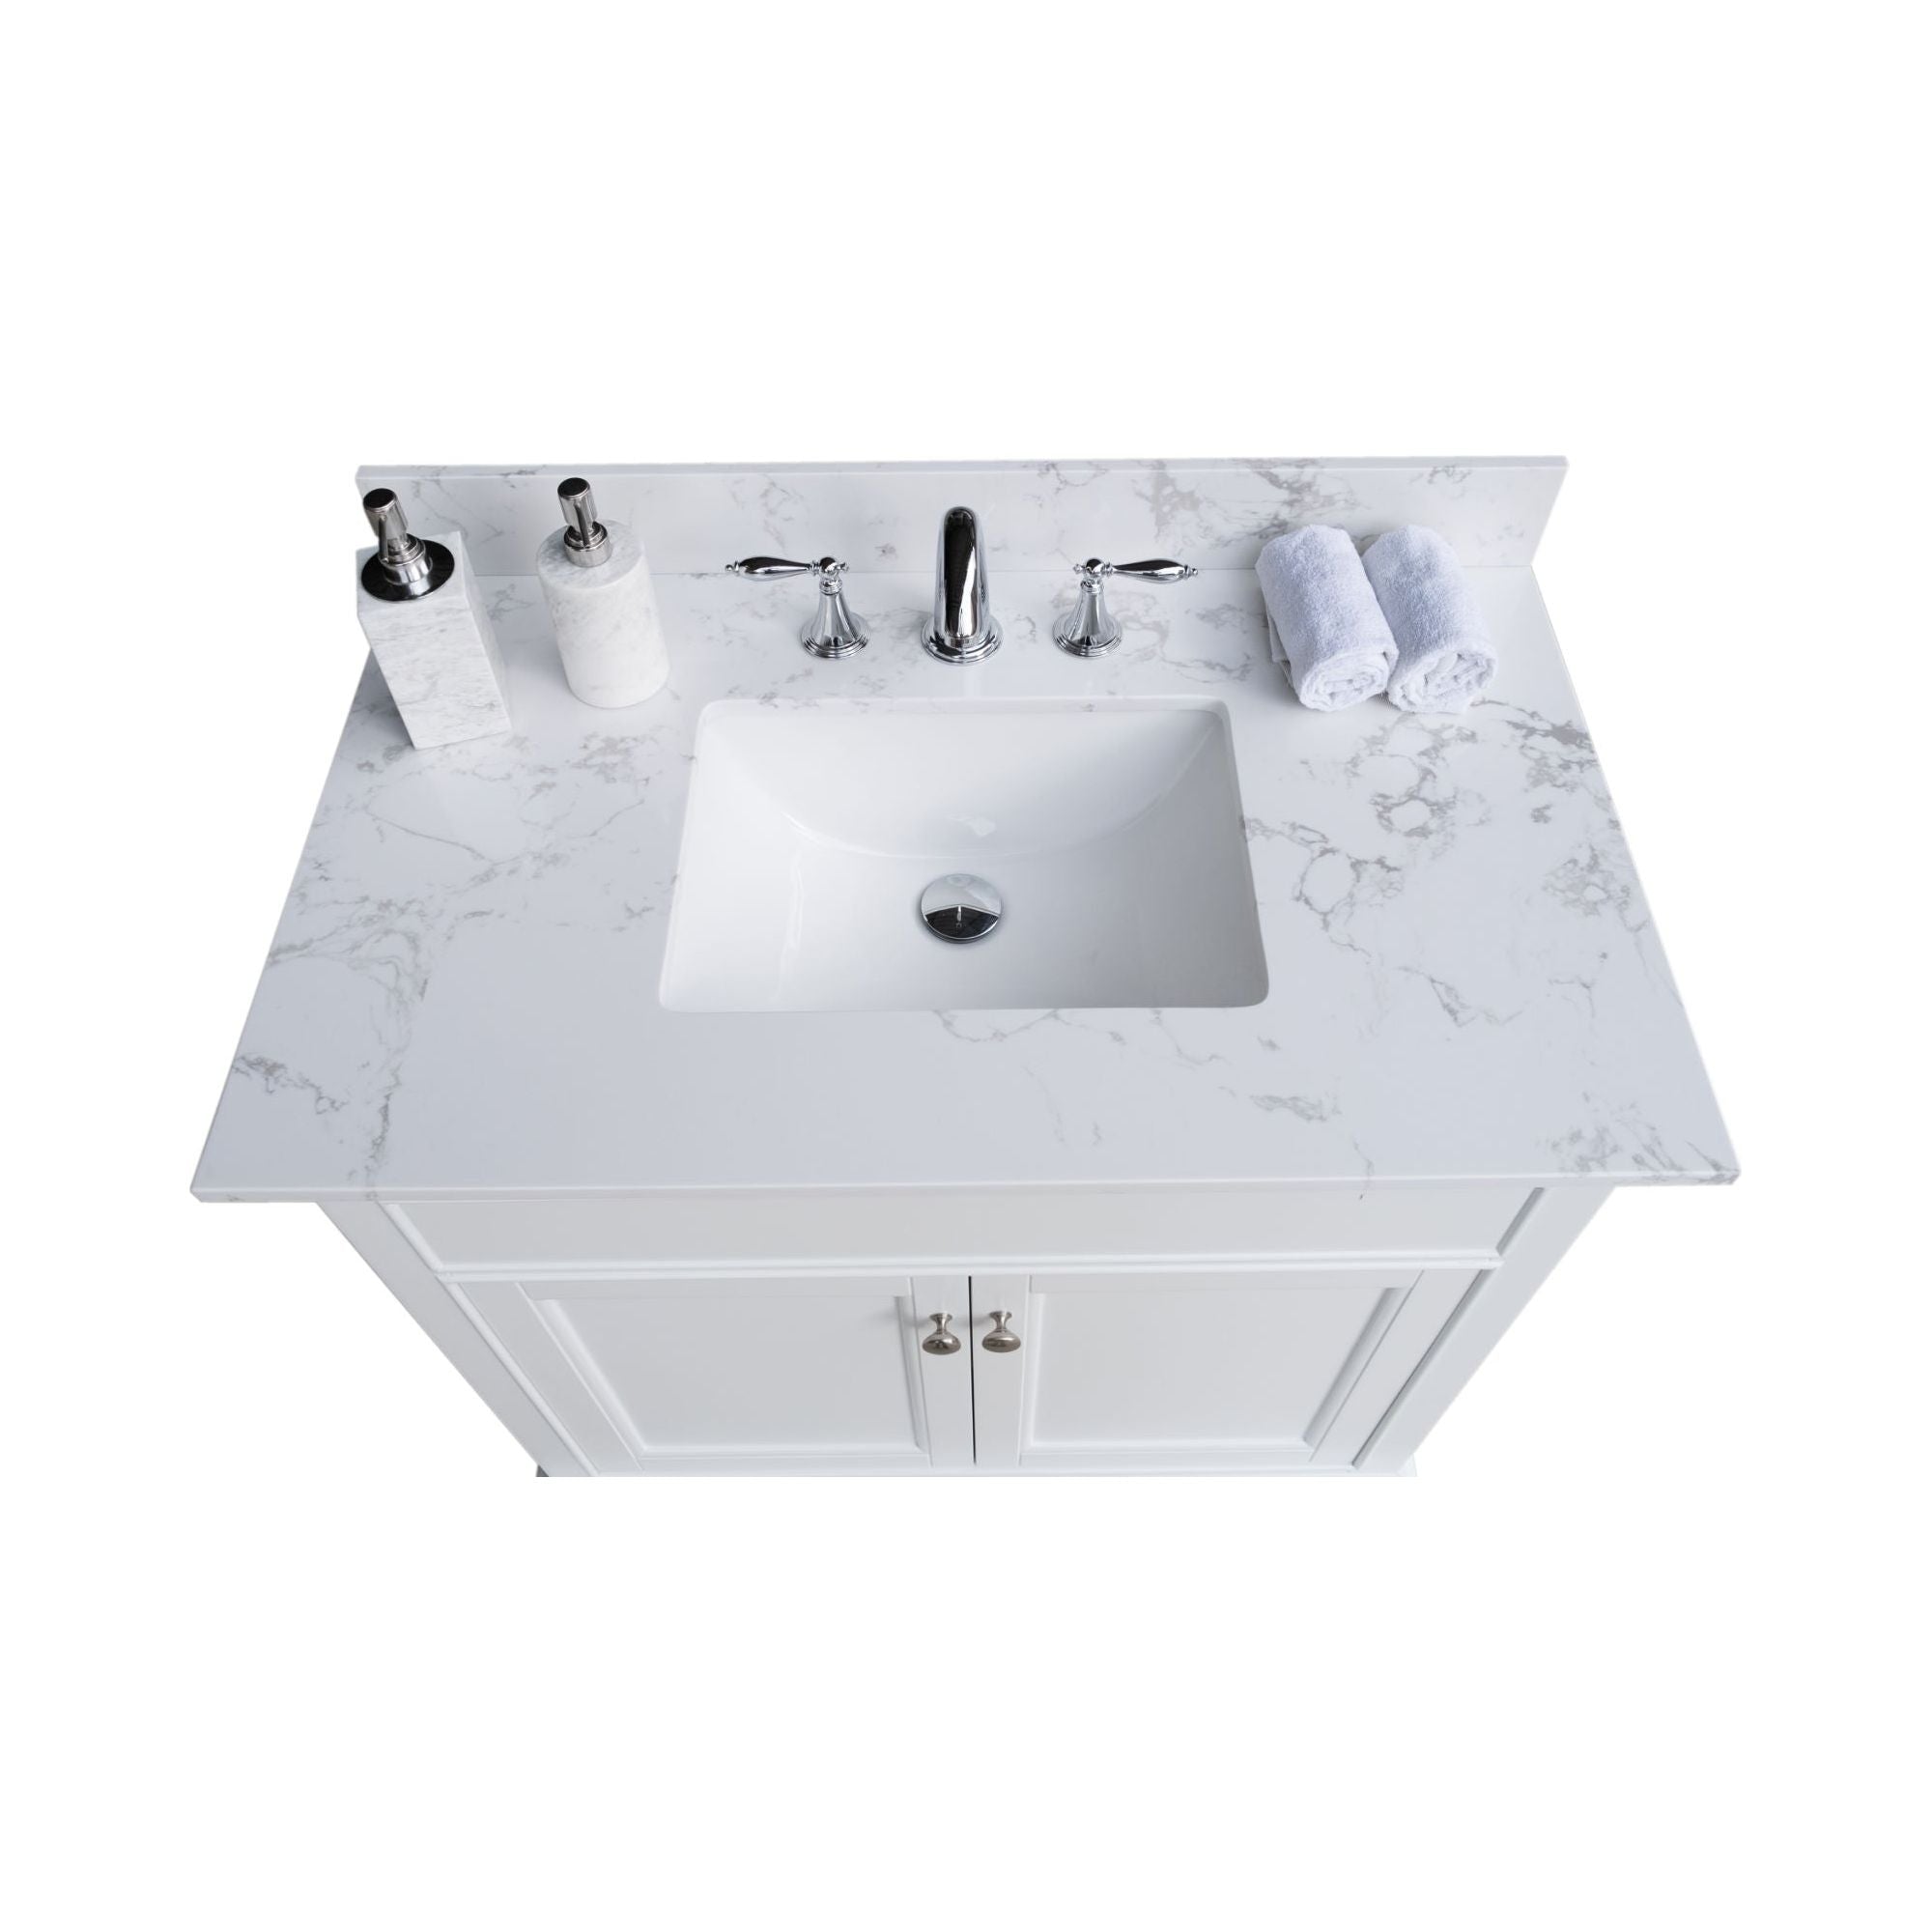 37inch bathroom vanity top stone carrara white new style tops with rectangle undermount ceramic sink and single faucet hole Moorescarts